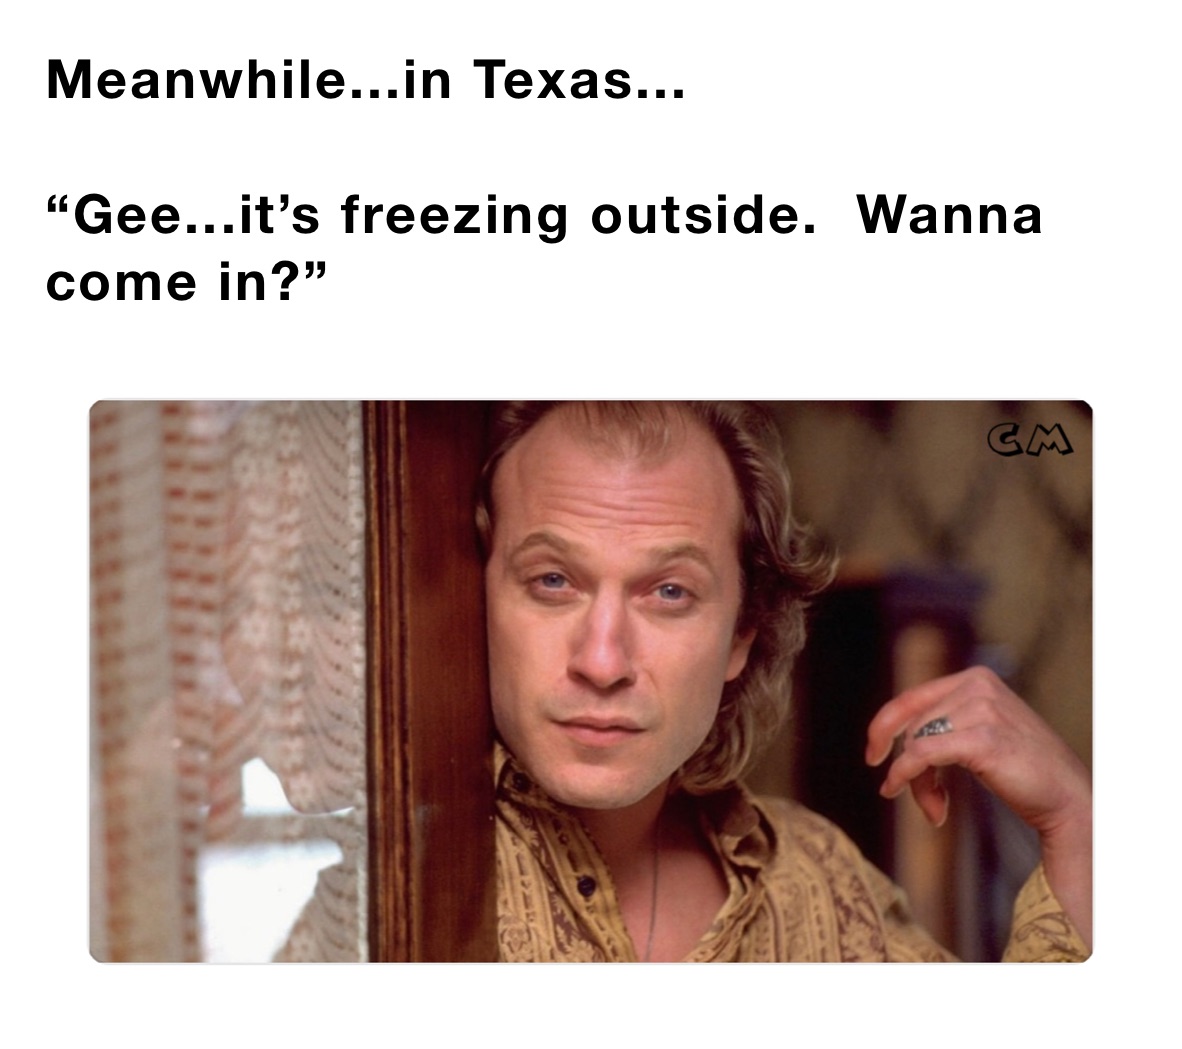 Meanwhile...in Texas...

“Gee...it’s freezing outside.  Wanna come in?”